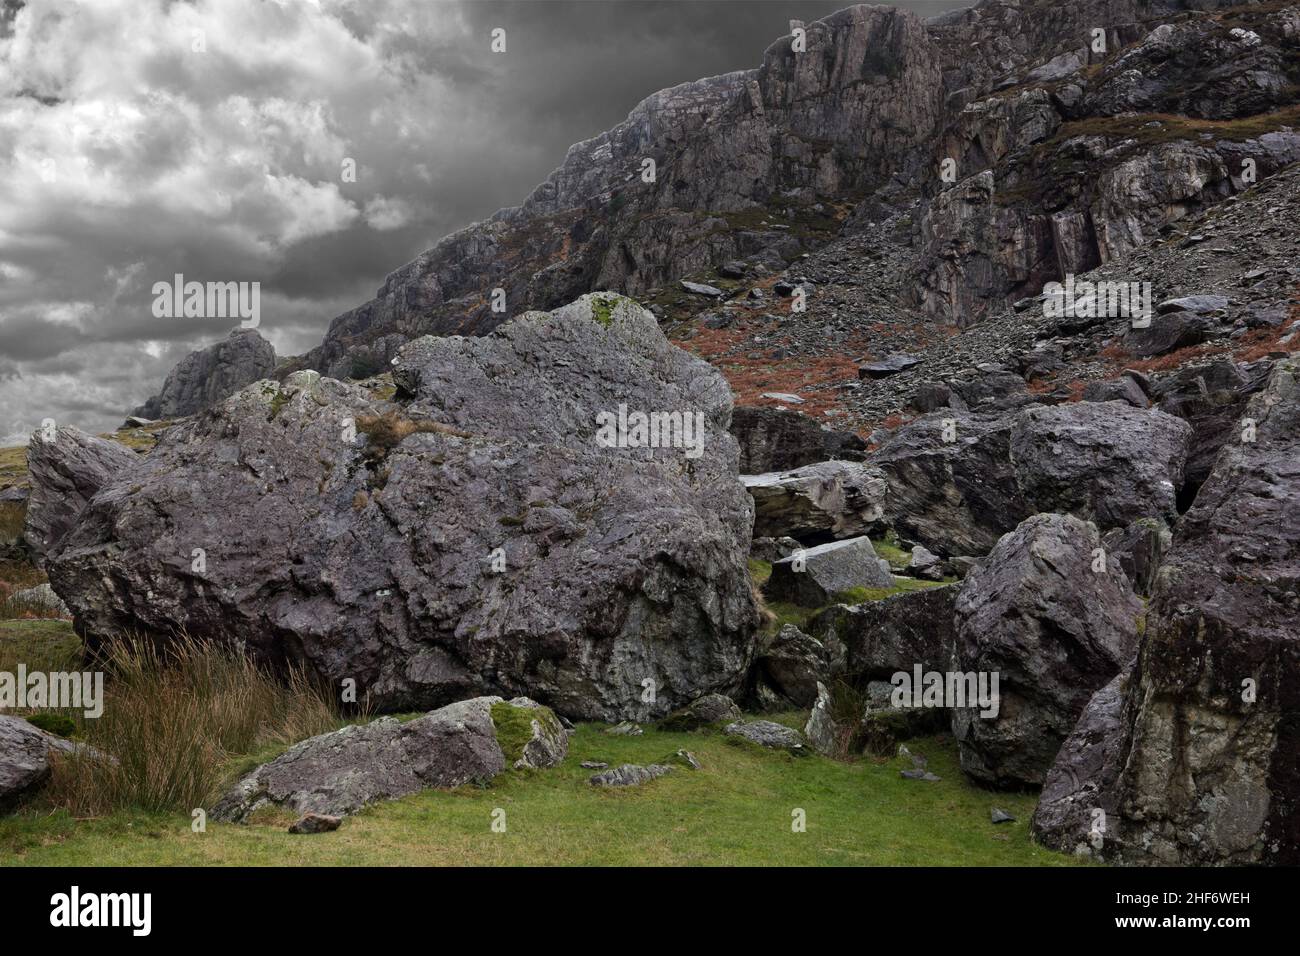 The Cromlech Boulders are a number of gigantic boulders in Llanberis Pass, Snowdonia. Stock Photo